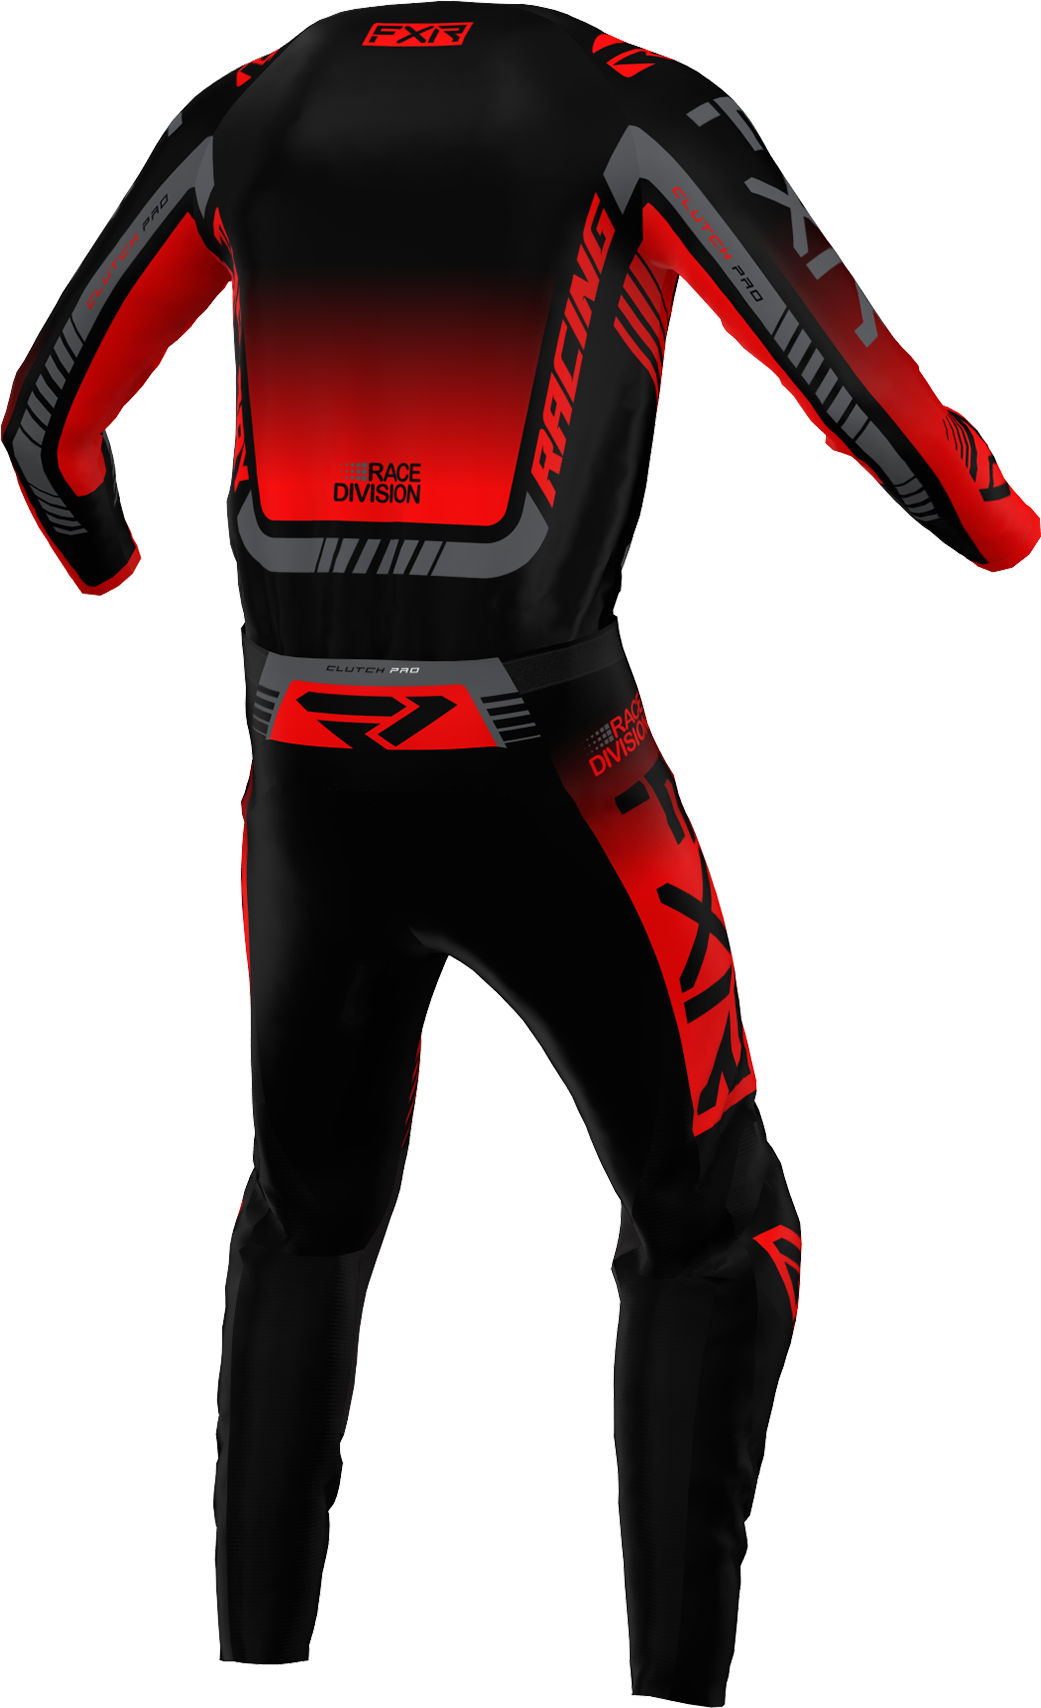 A 3D image of FXR's Clutch Pro MX Jersey and Pant in Black/Red/Char colorway